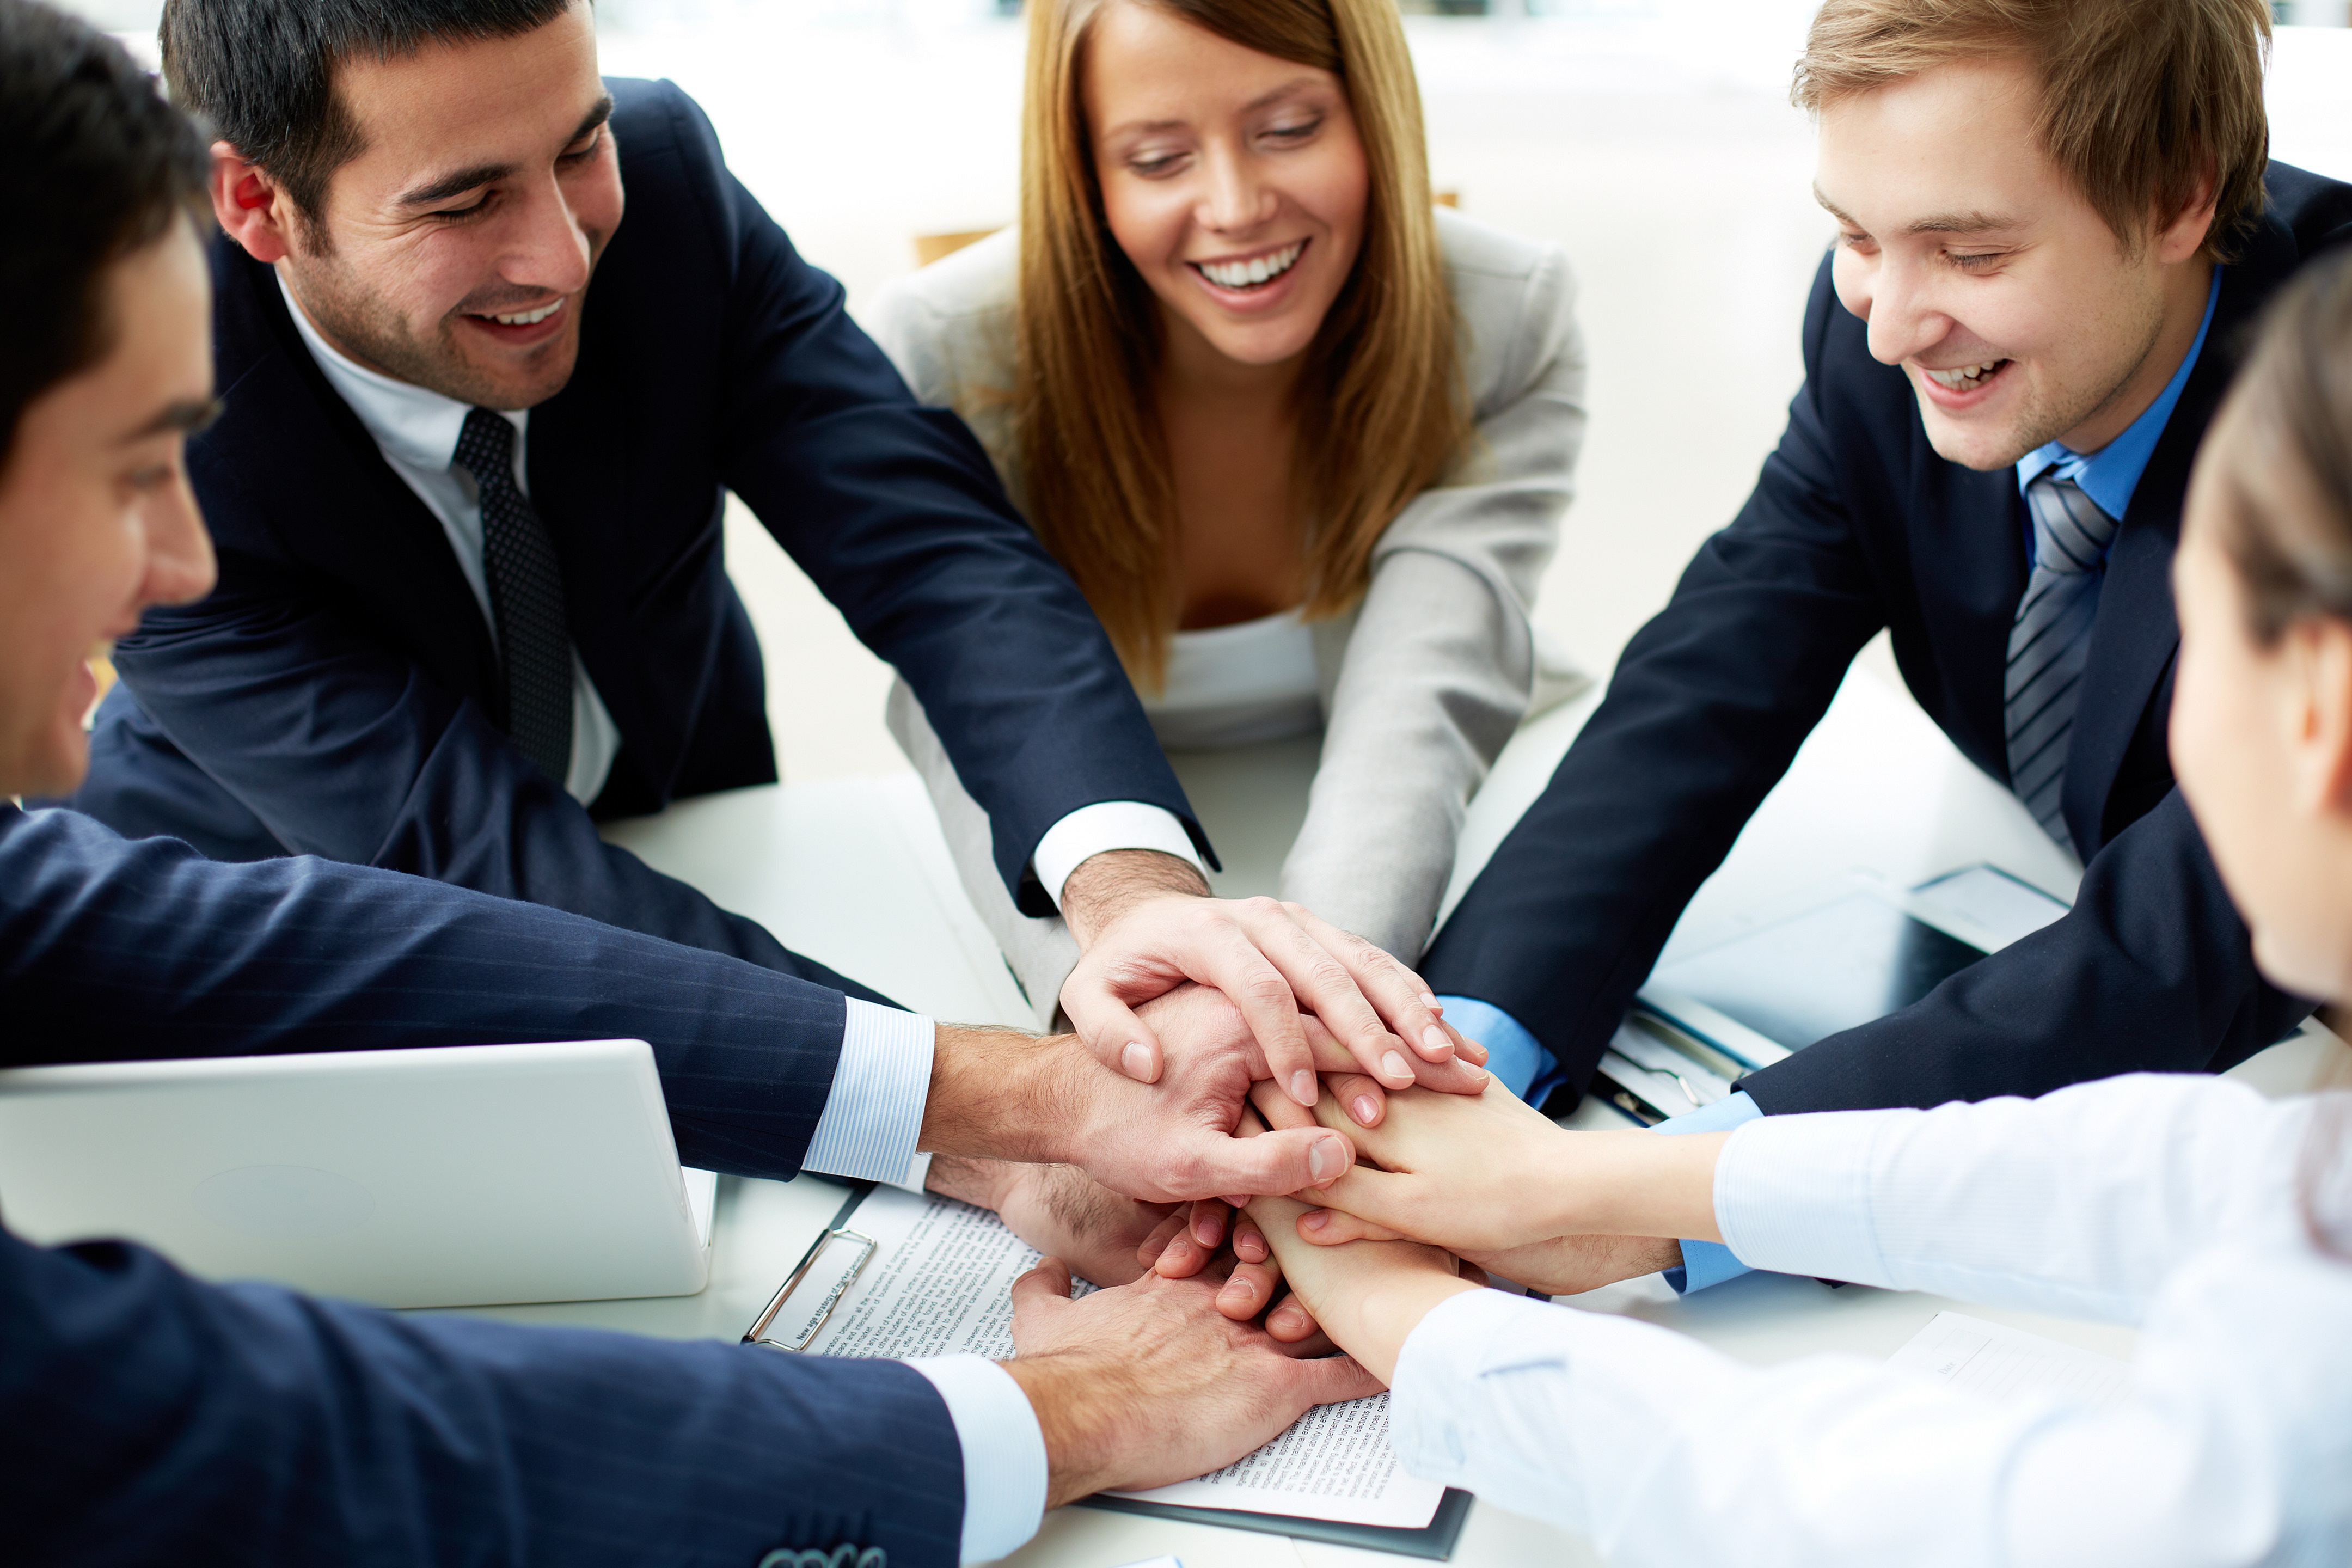 3 Winning Ways to Support Your Sales Team